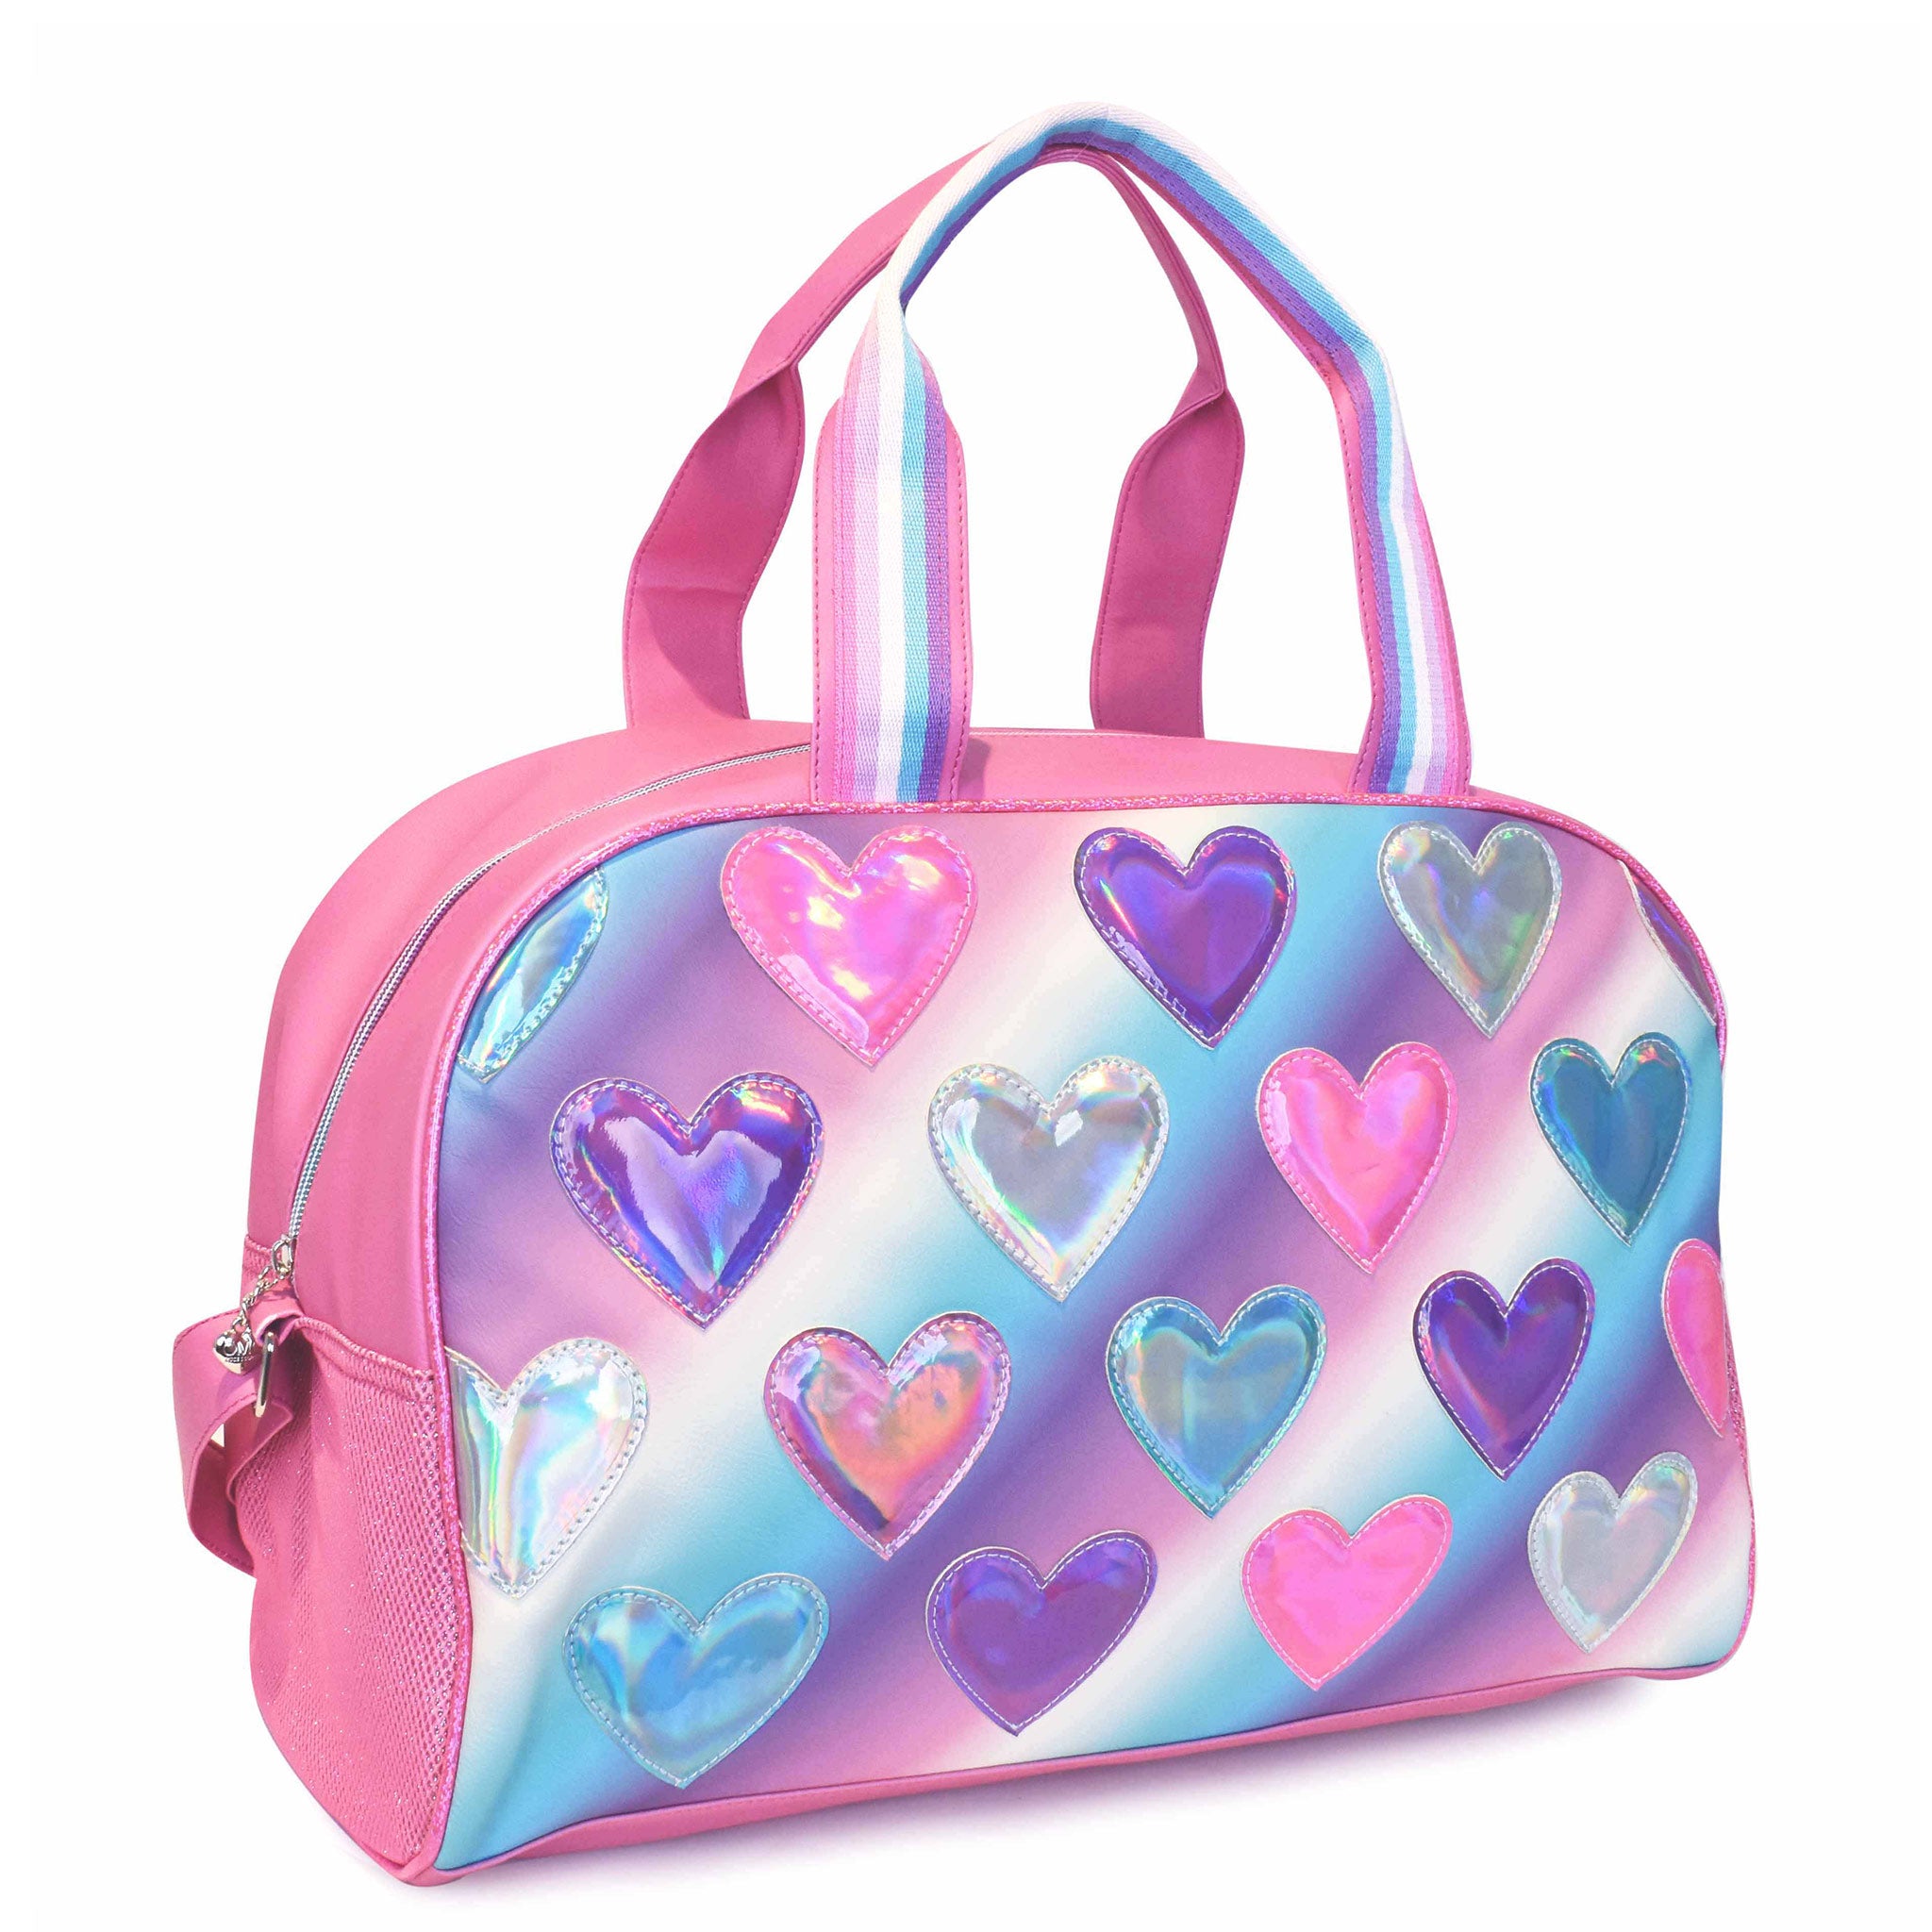 Side view of a pink, purple, and blue ombre large duffle bag with metallic heart patches